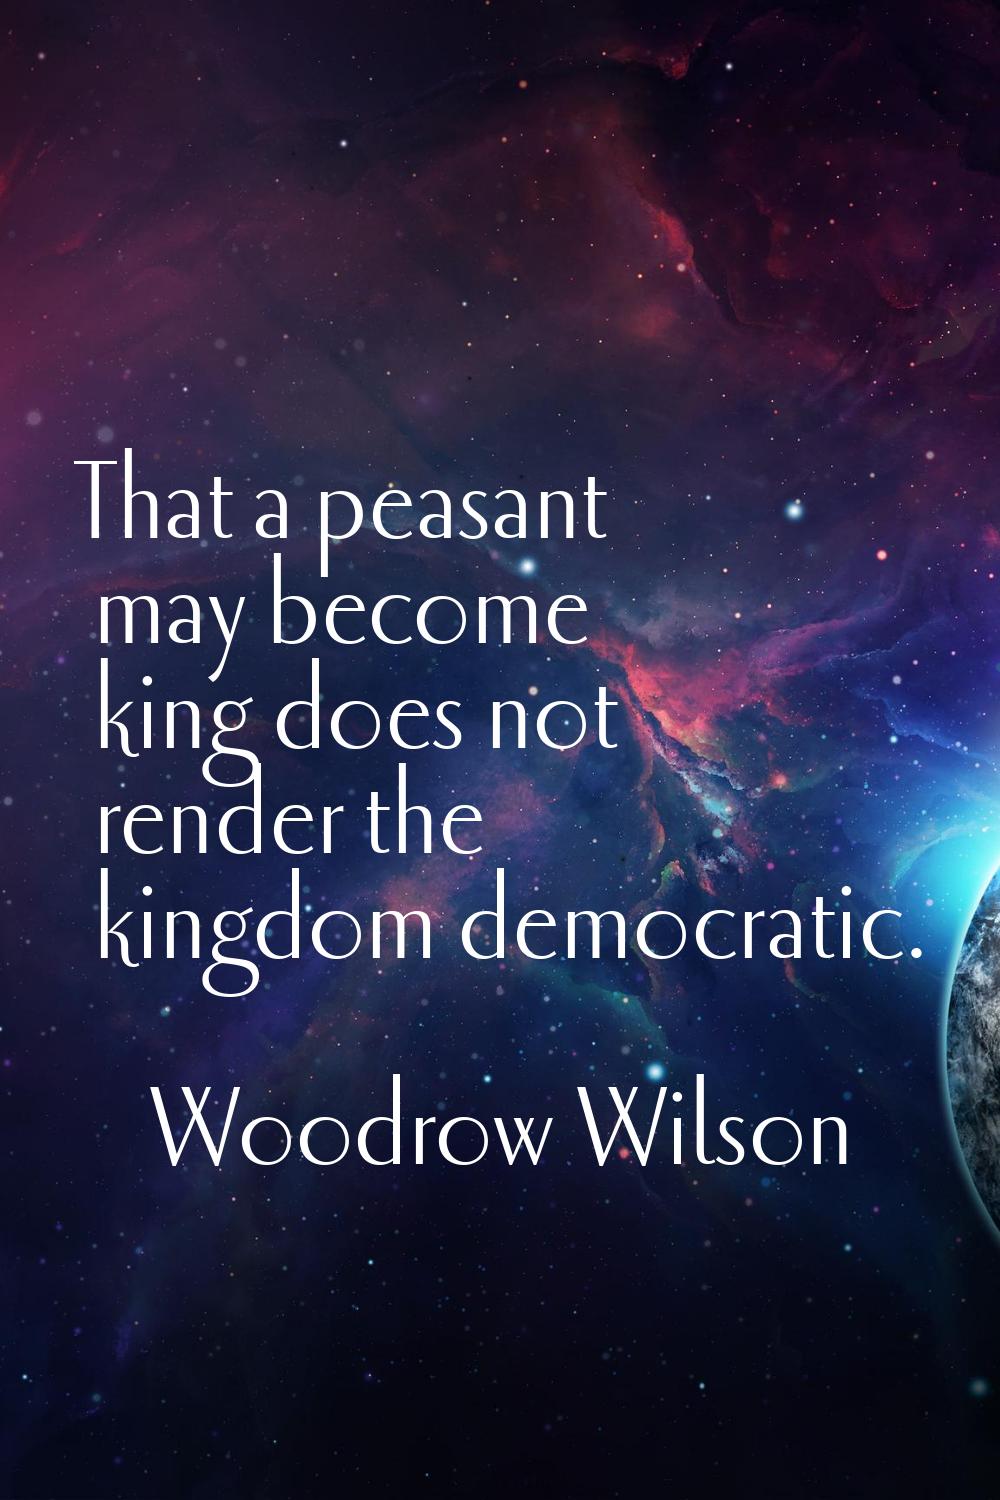 That a peasant may become king does not render the kingdom democratic.